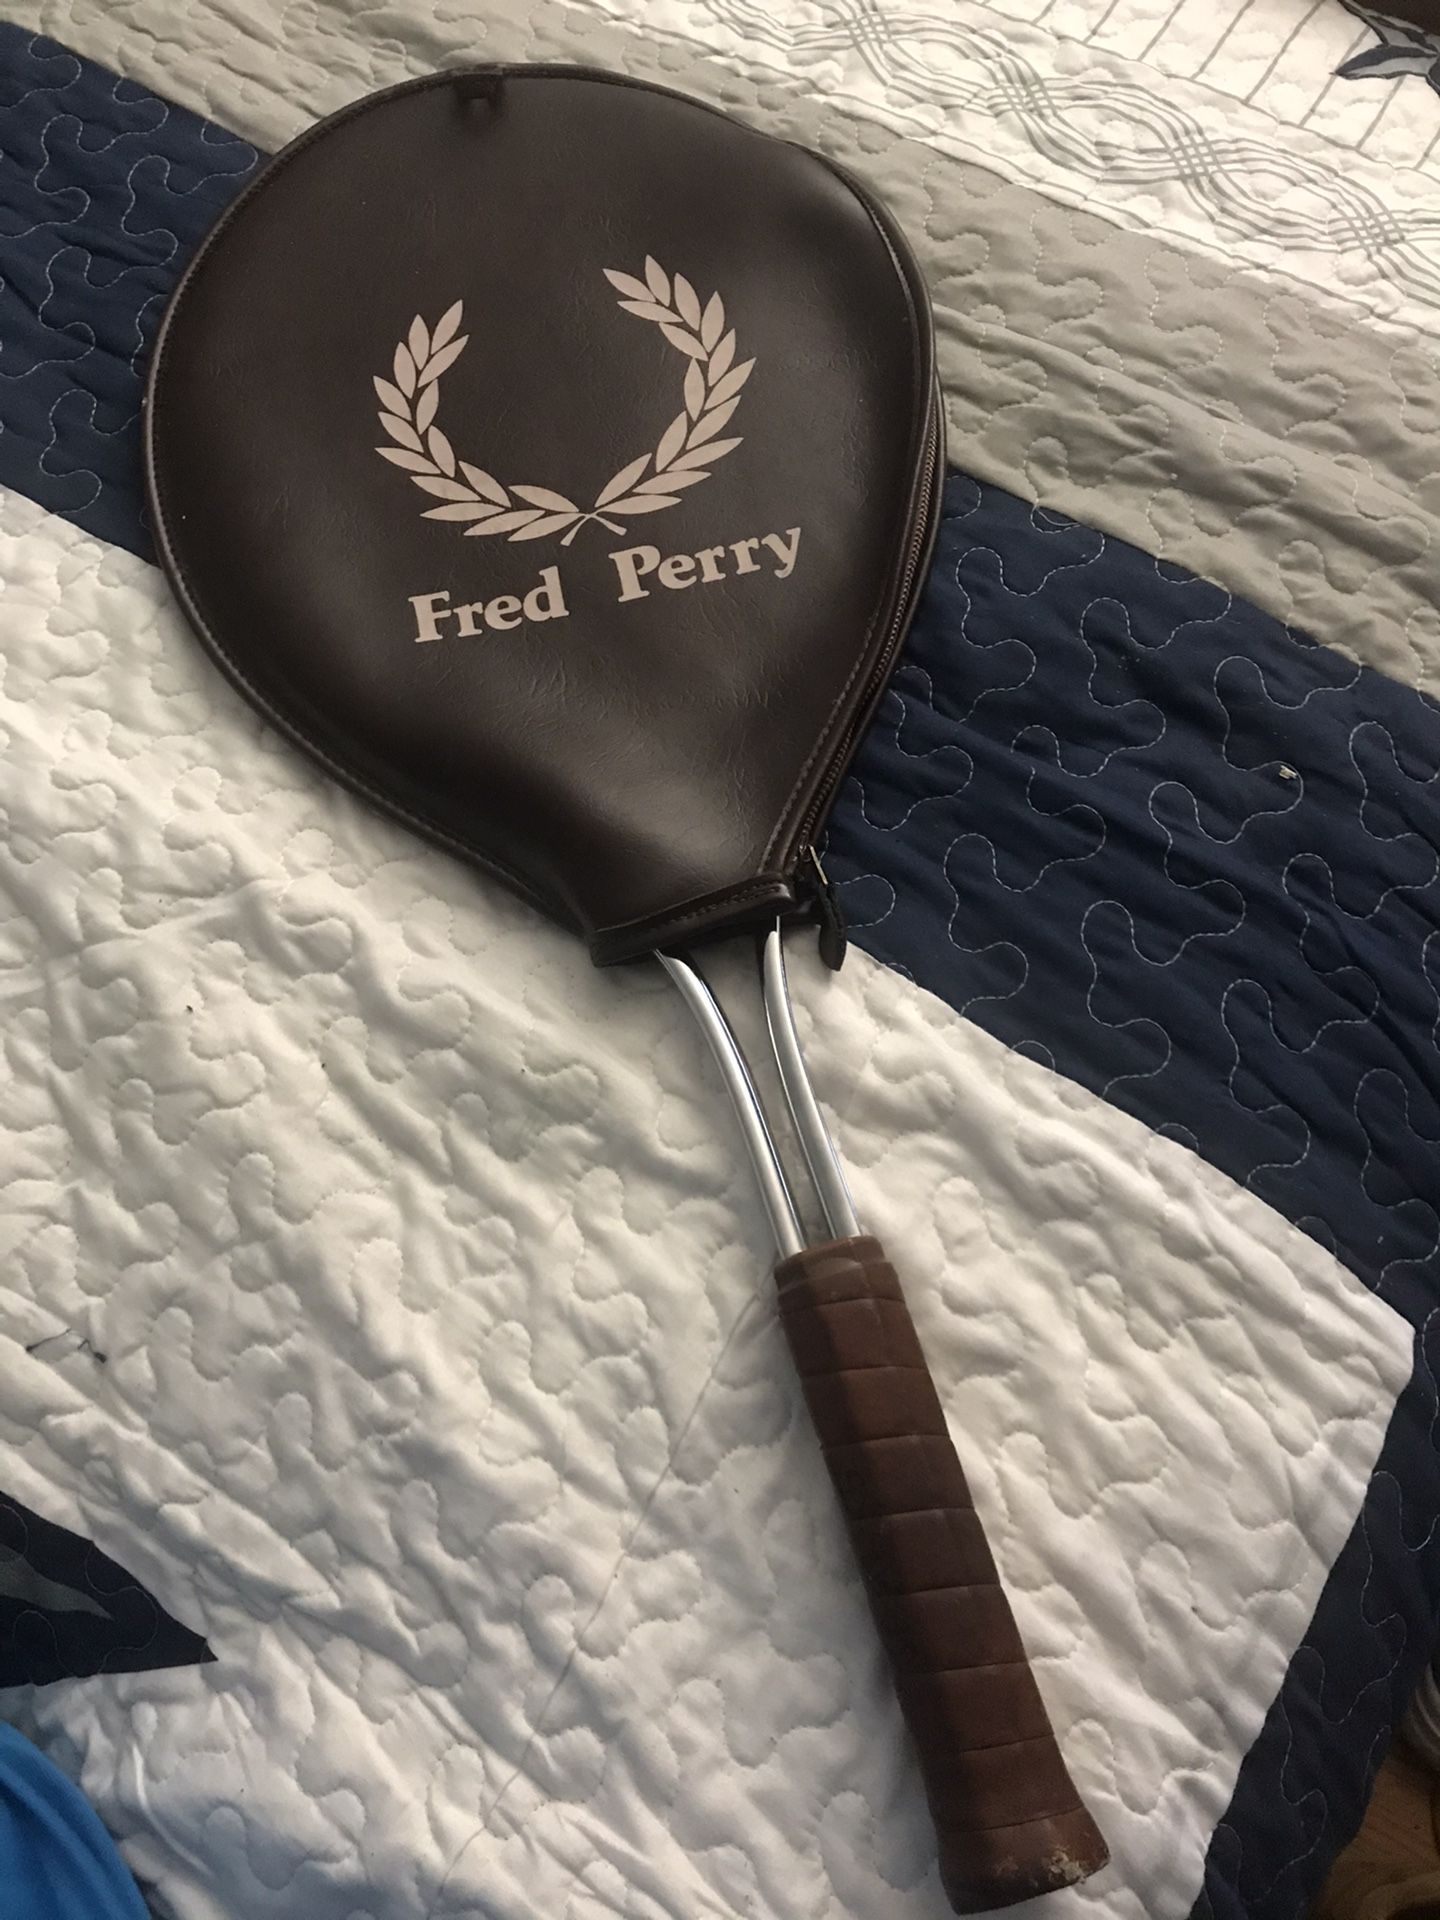 Fred Perry Tennis Racket